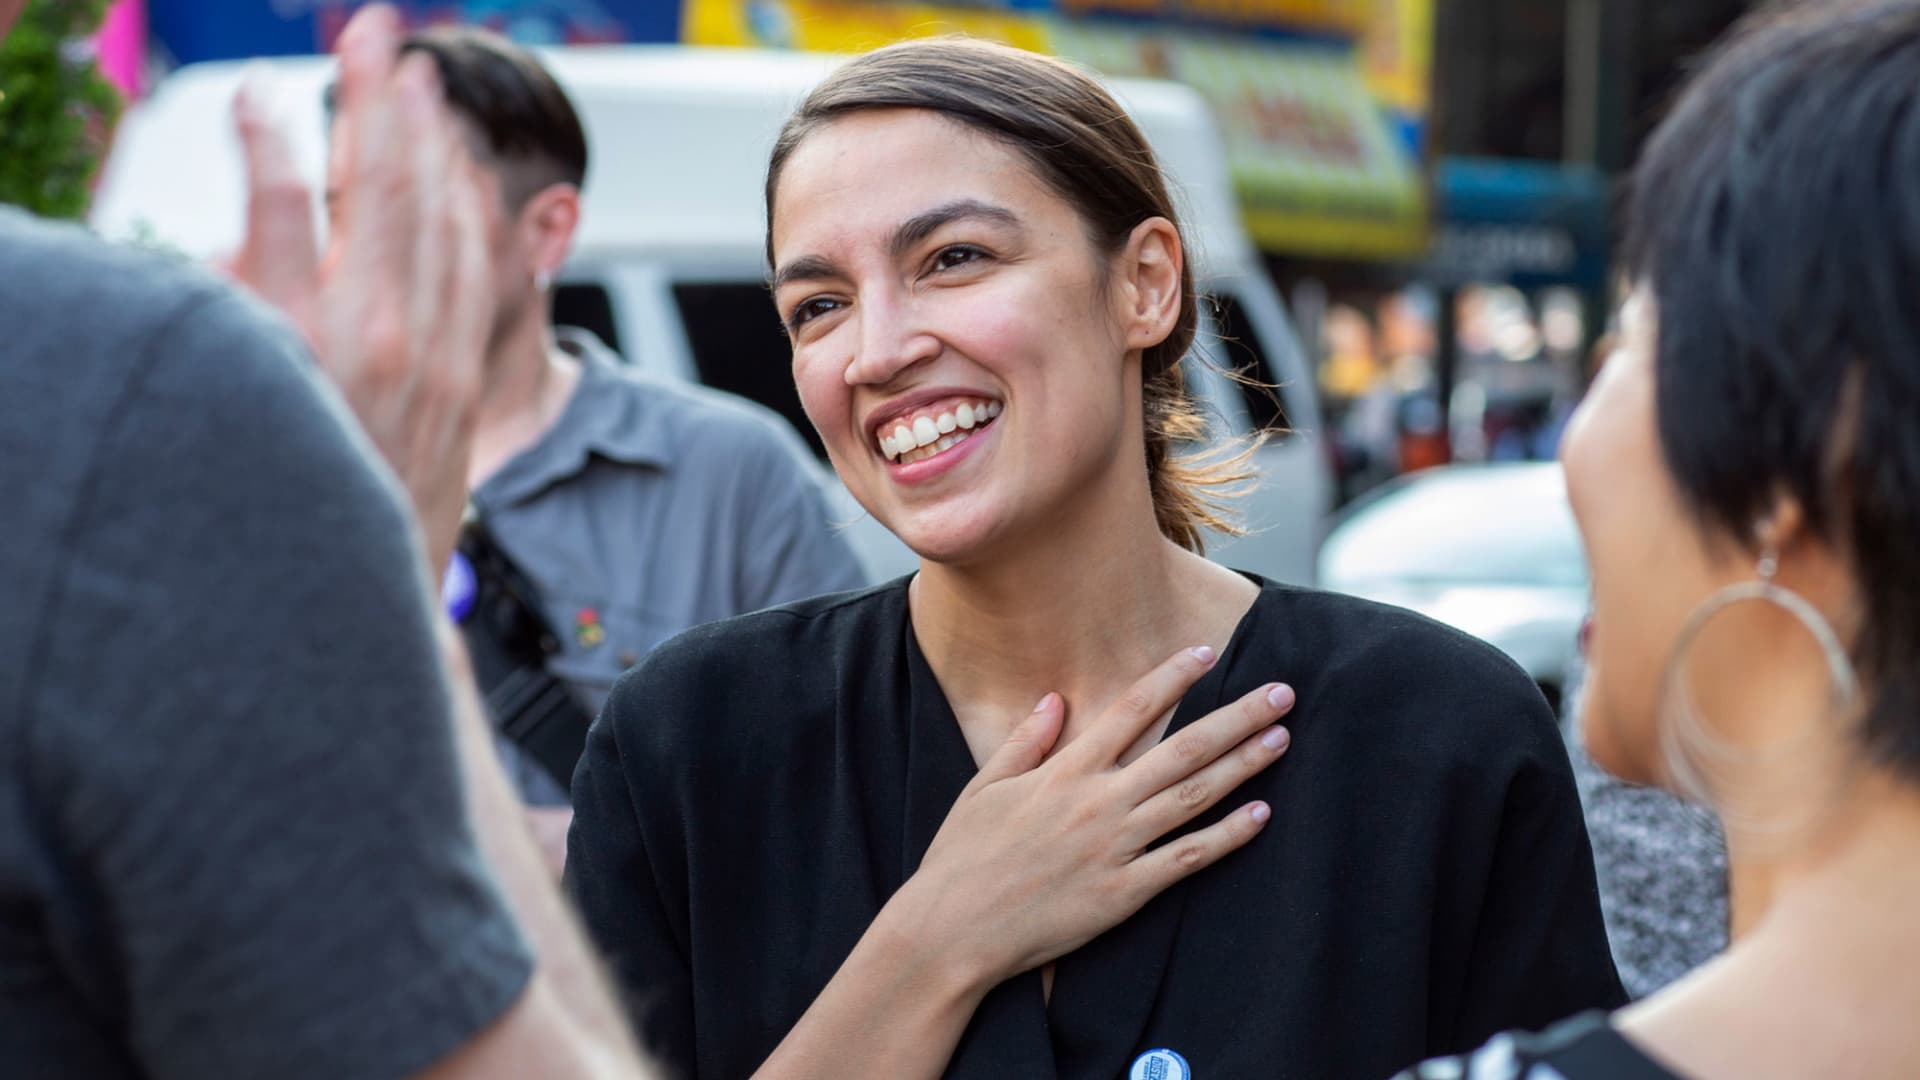 Ocasio-Cortez, Tlaib and others who made history in the 2018 midterms